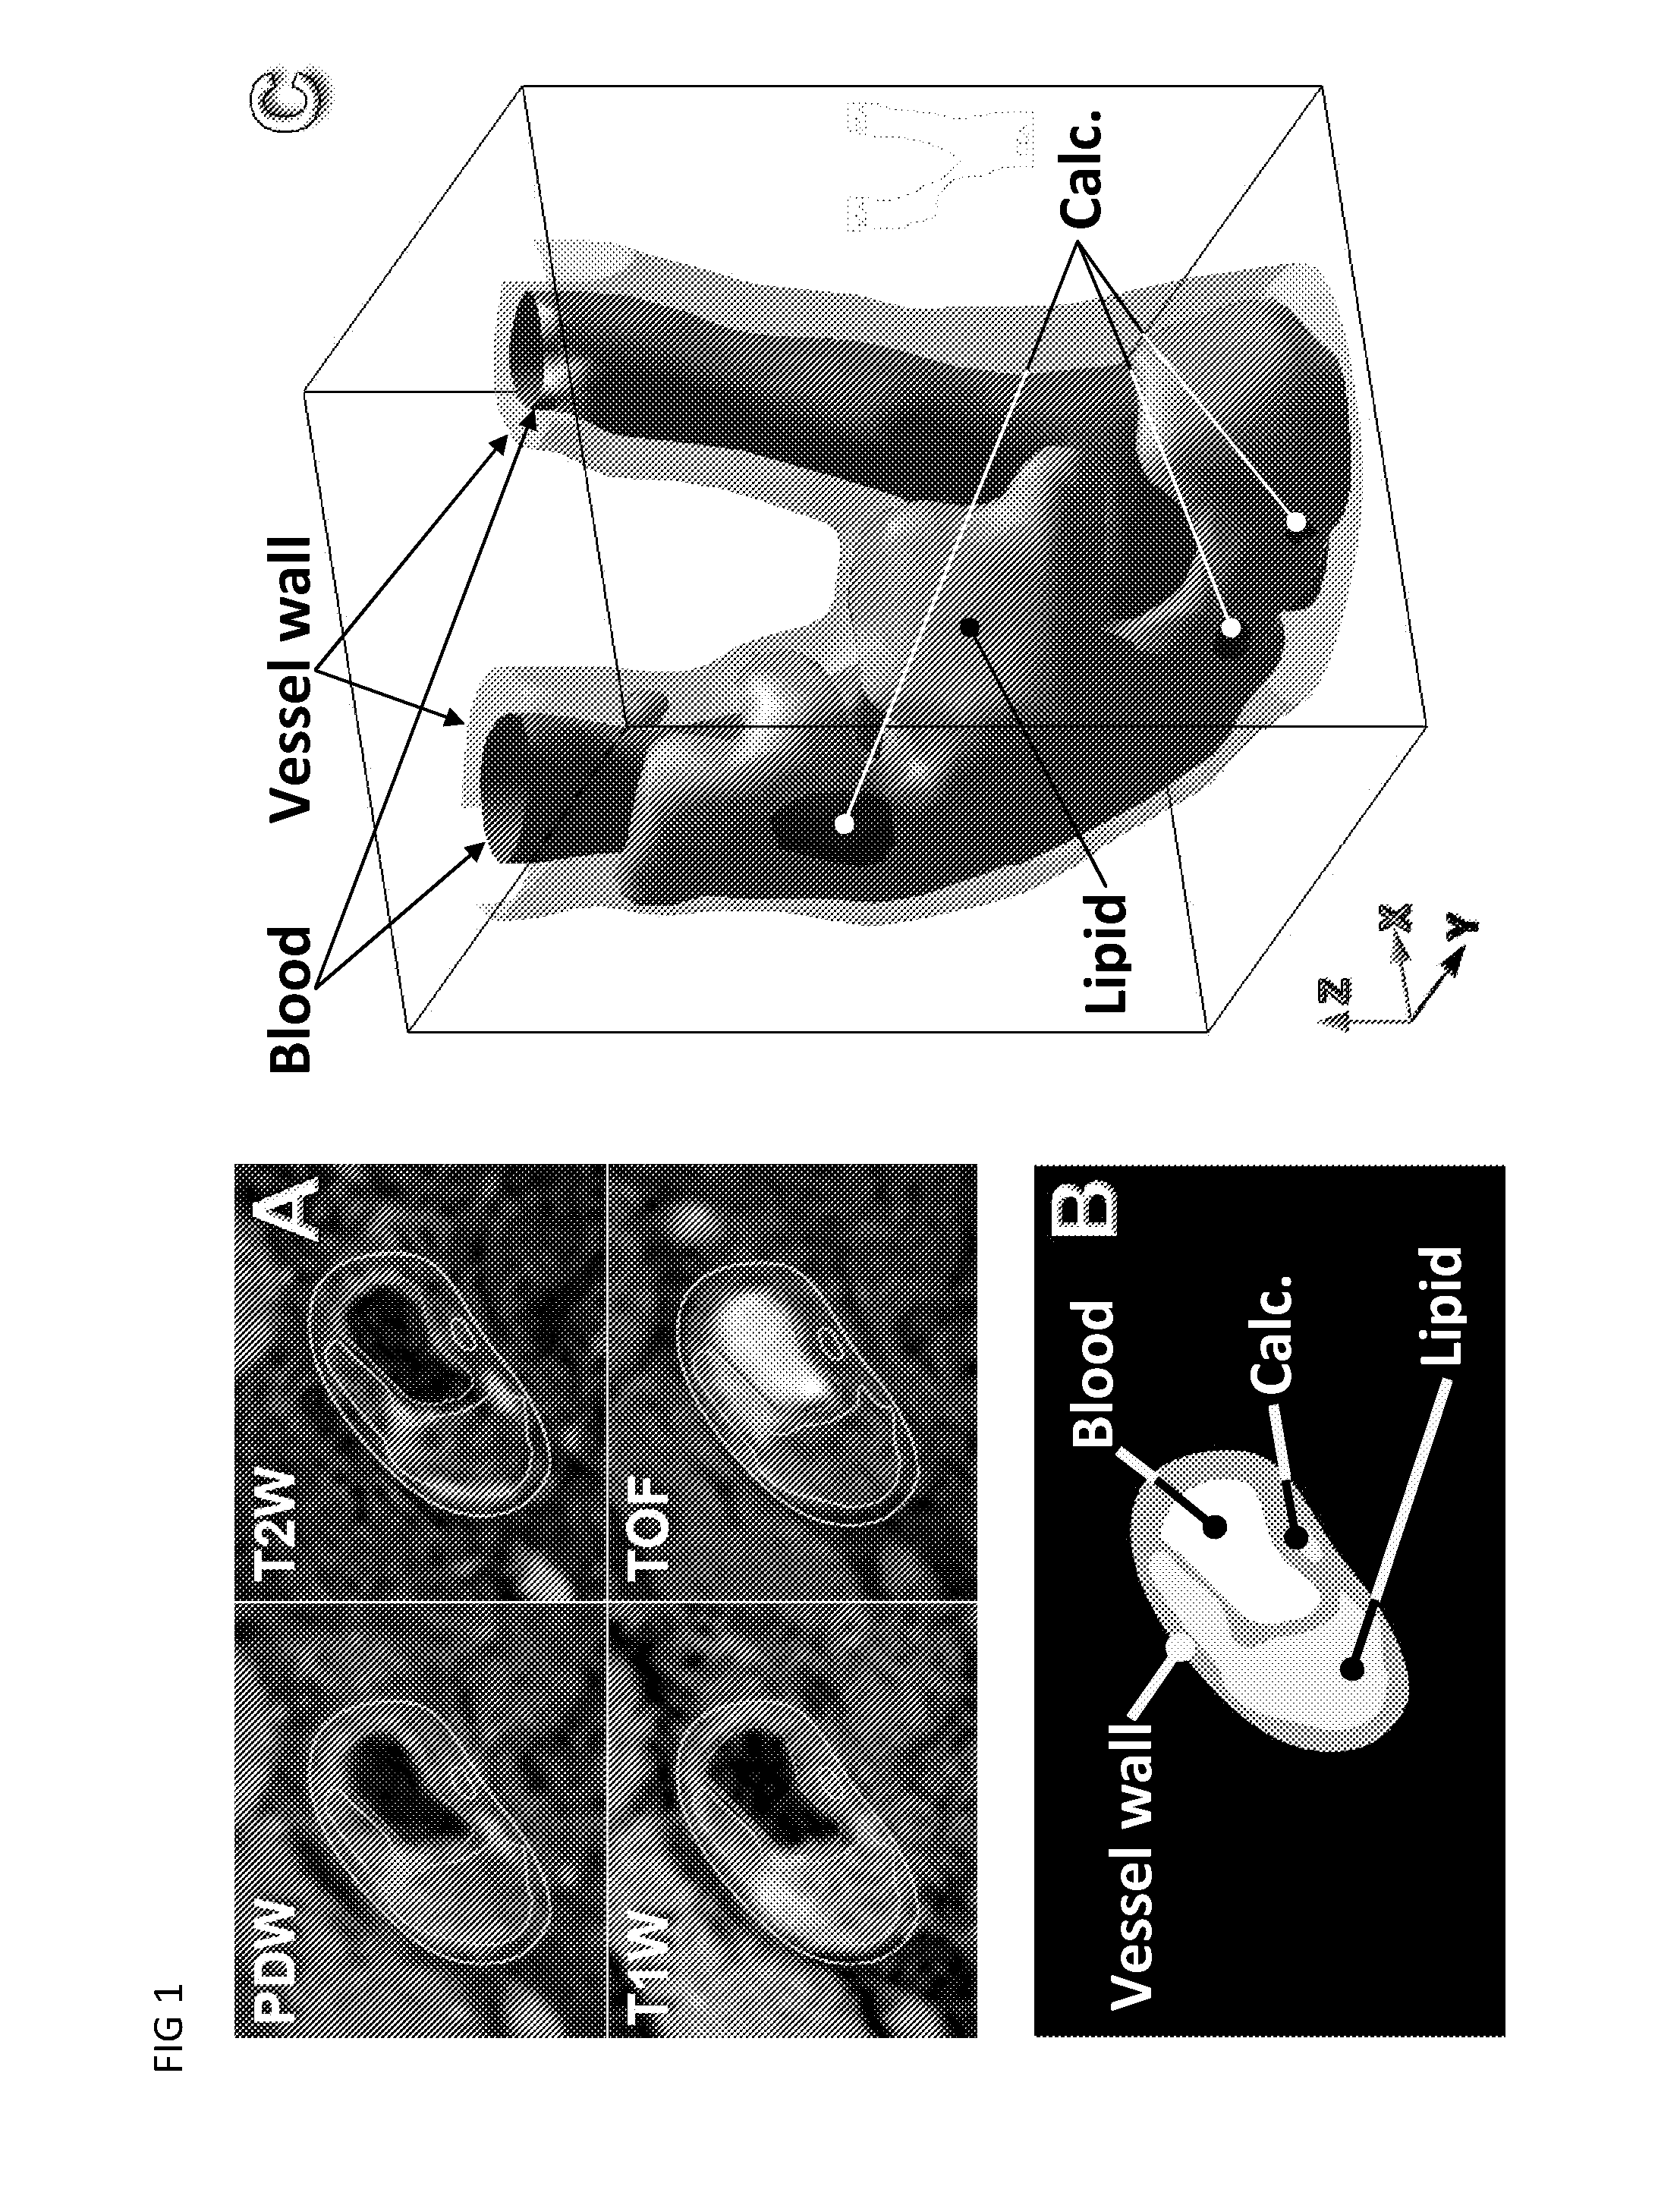 Method for calculating pressures in a fluid stream through a tube section, especially a blood vessel with atherosclerotic plaque